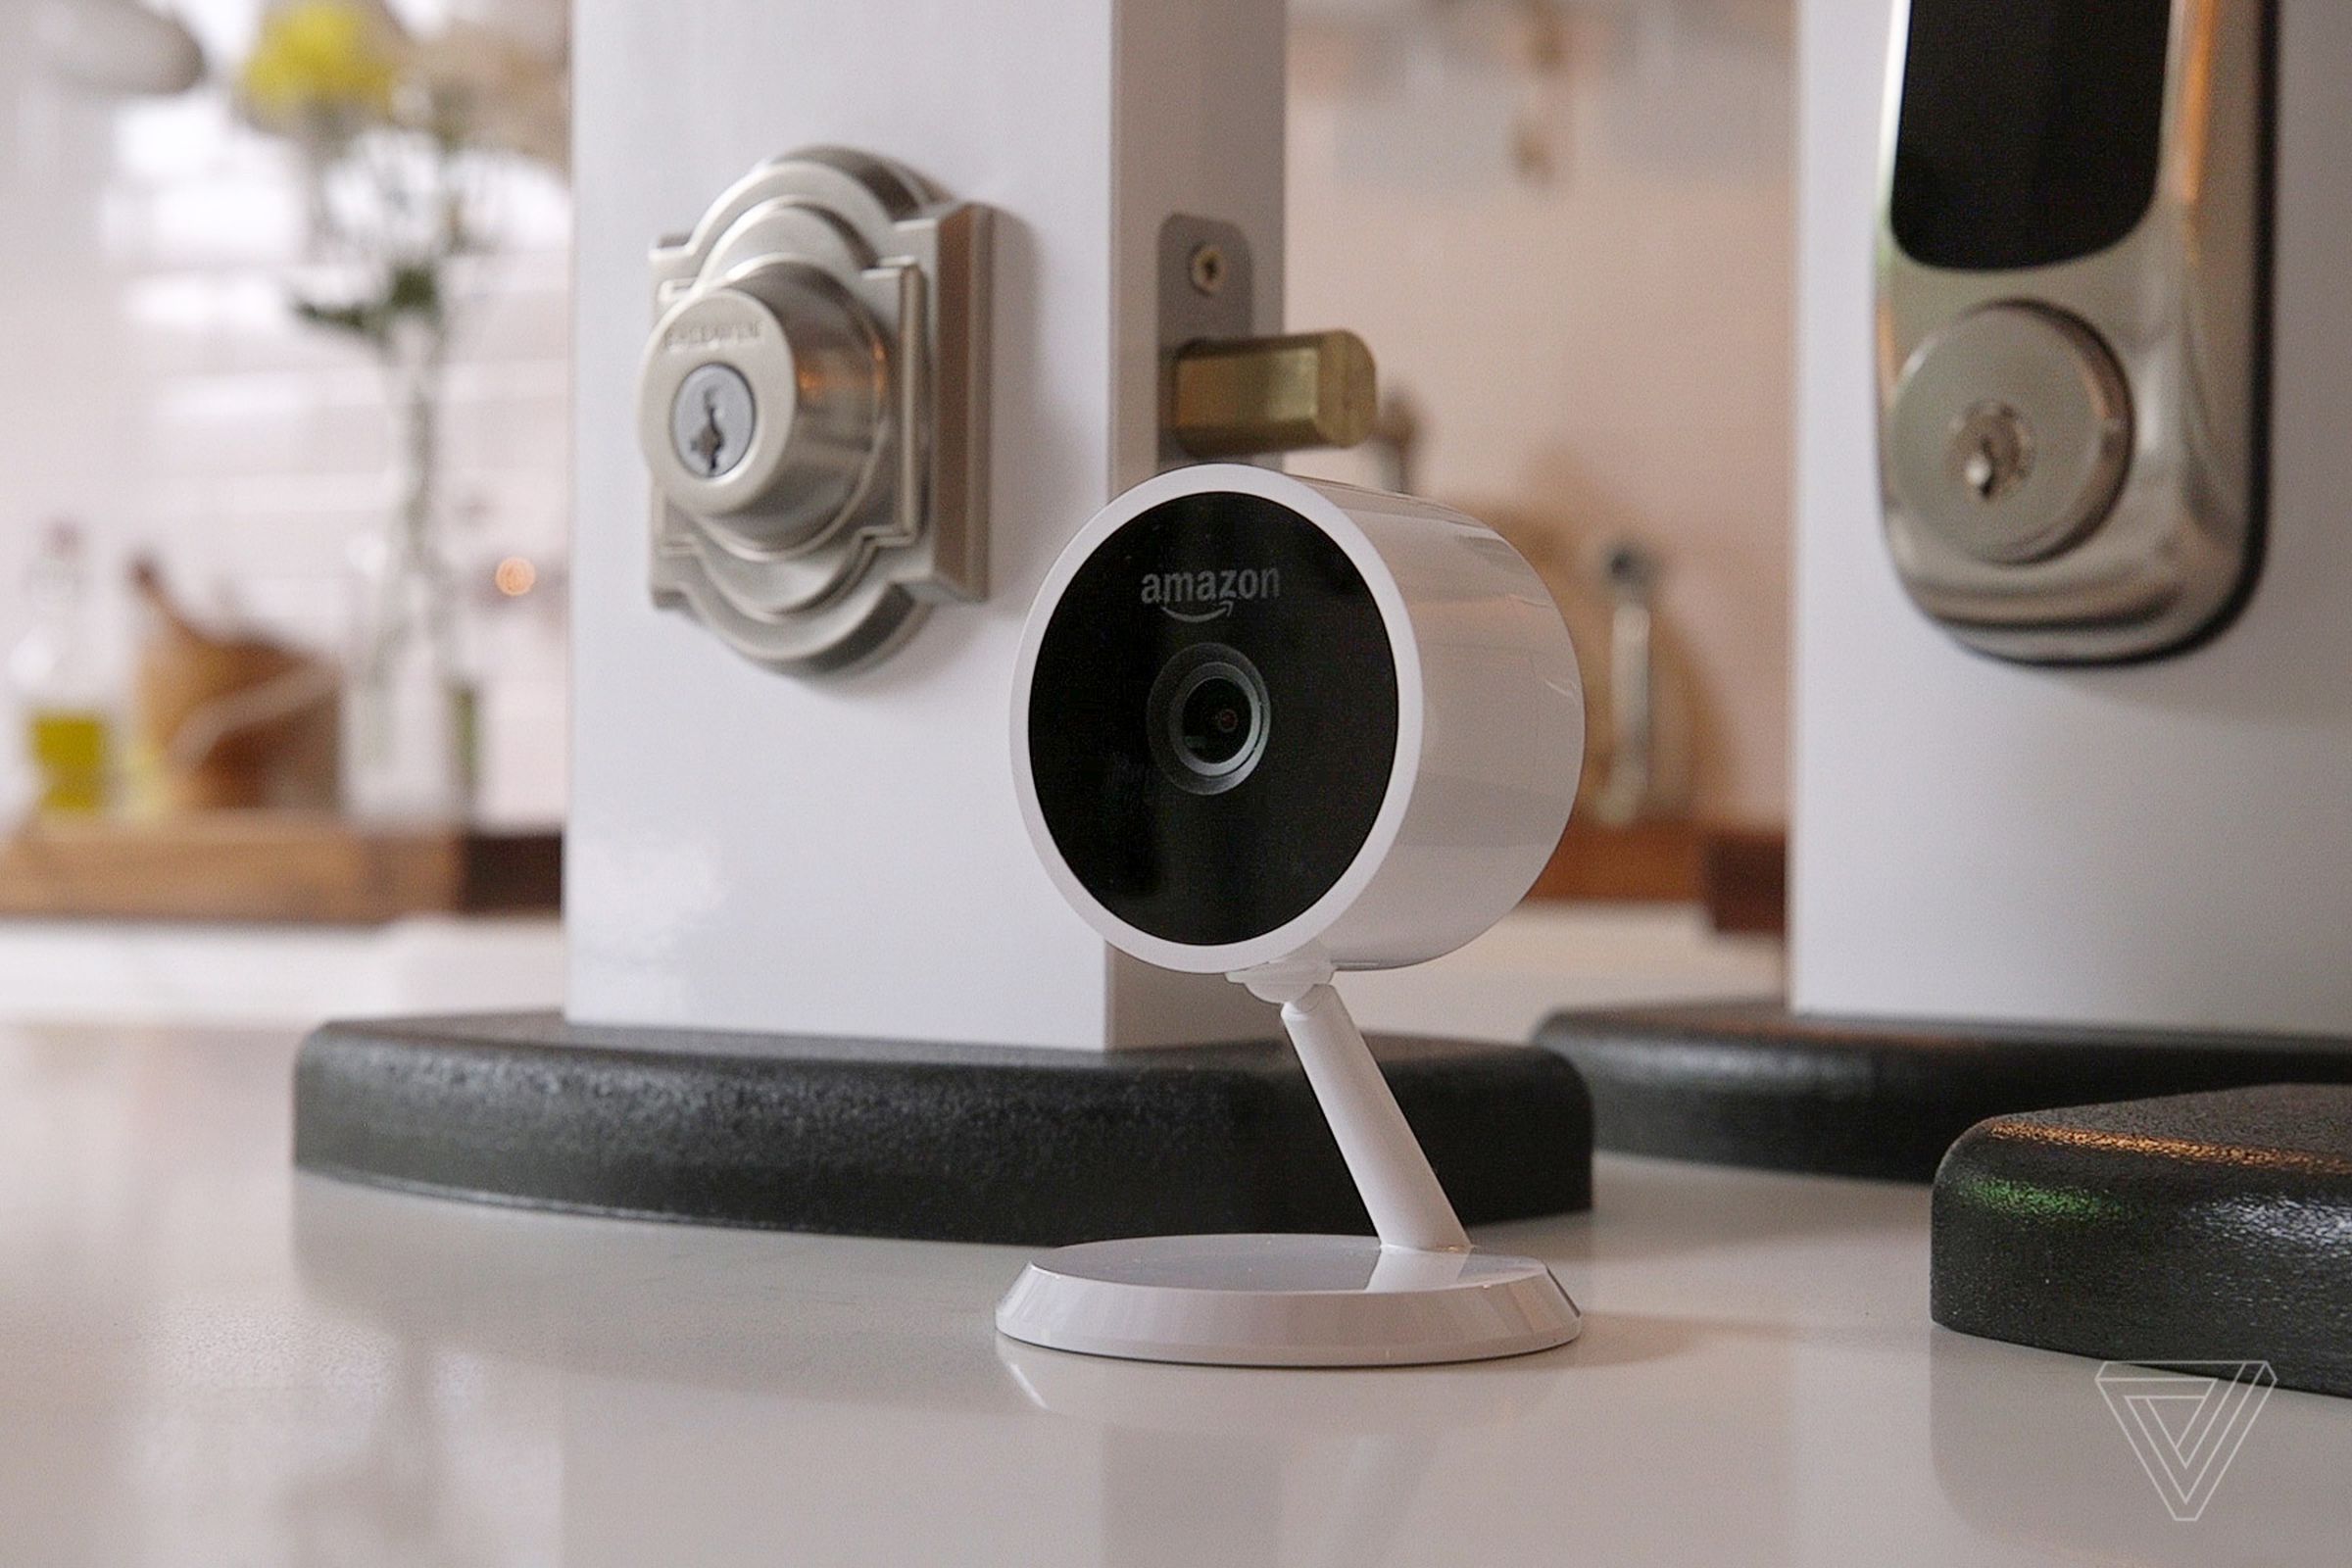 The Amazon Cloud Cam and compatible locks